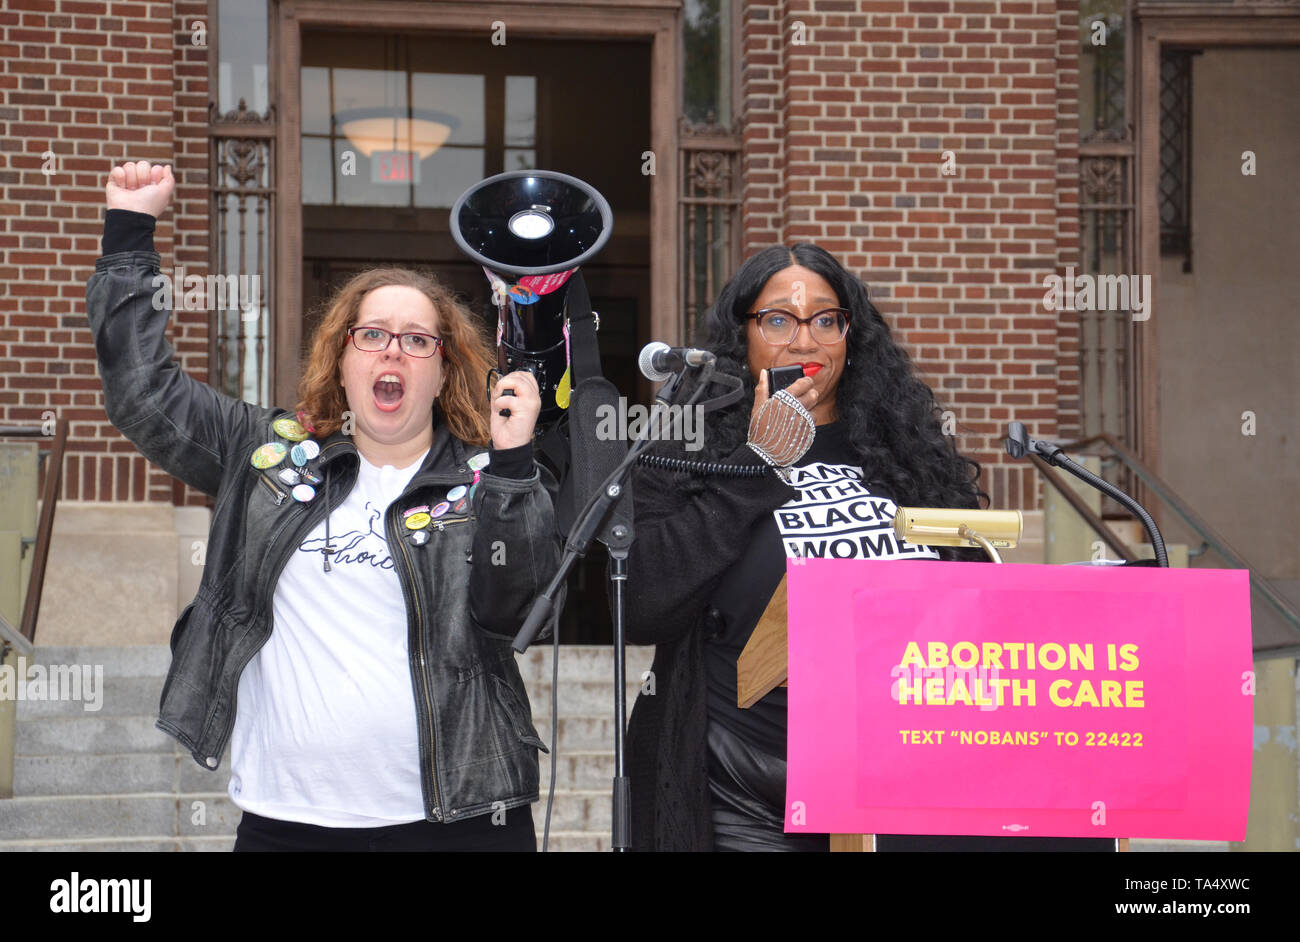 ANN ARBOR, MI/USA - MAY 21, 2019: Cassy Jones McBryde, founder of the International Fuller Woman Network, addresses the Ann Arbor Stop the Bans protes Stock Photo